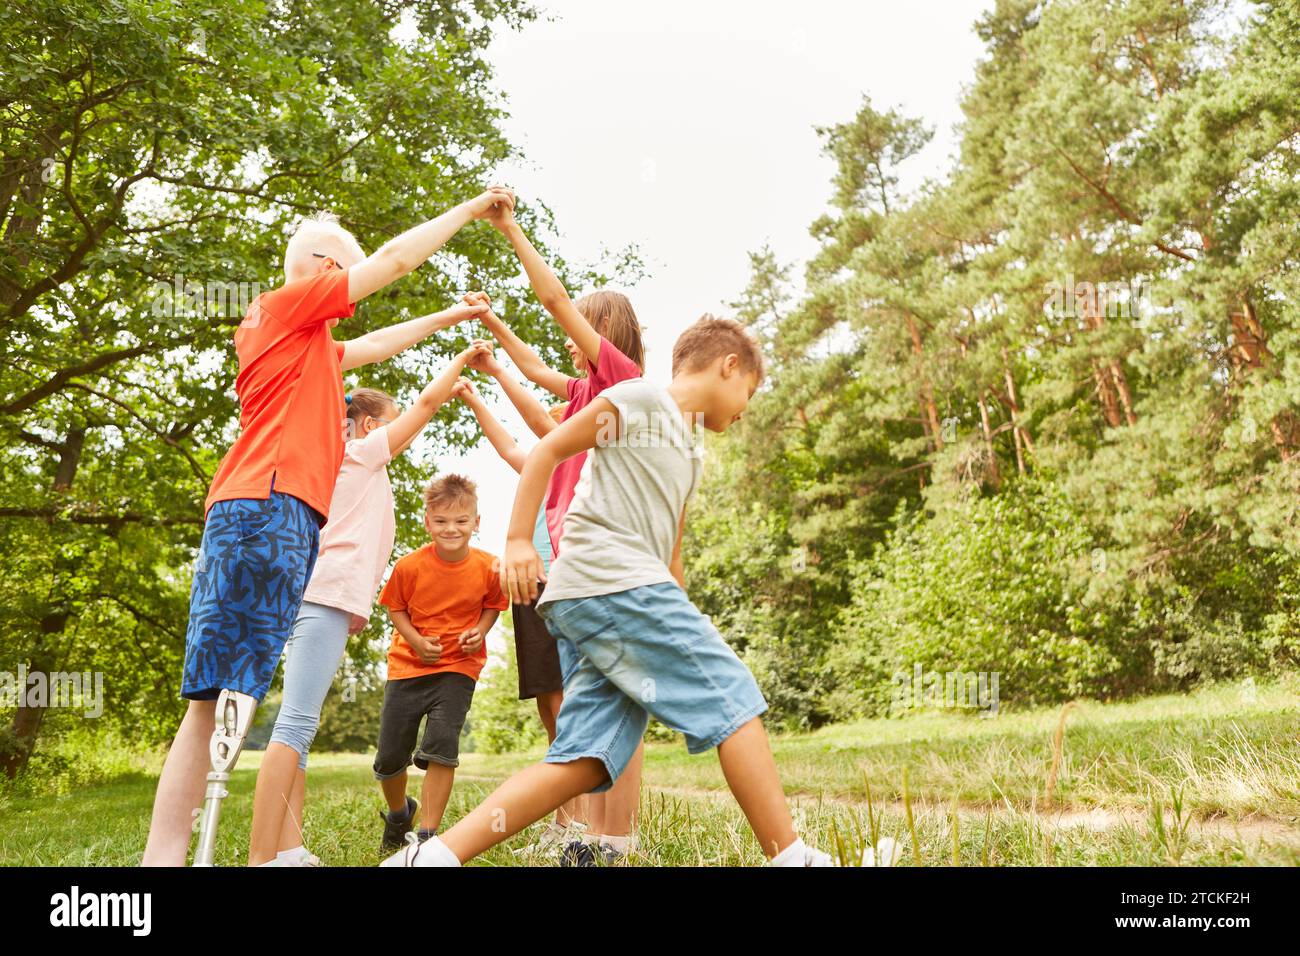 Children having fun while playing together during summer at park Stock Photo